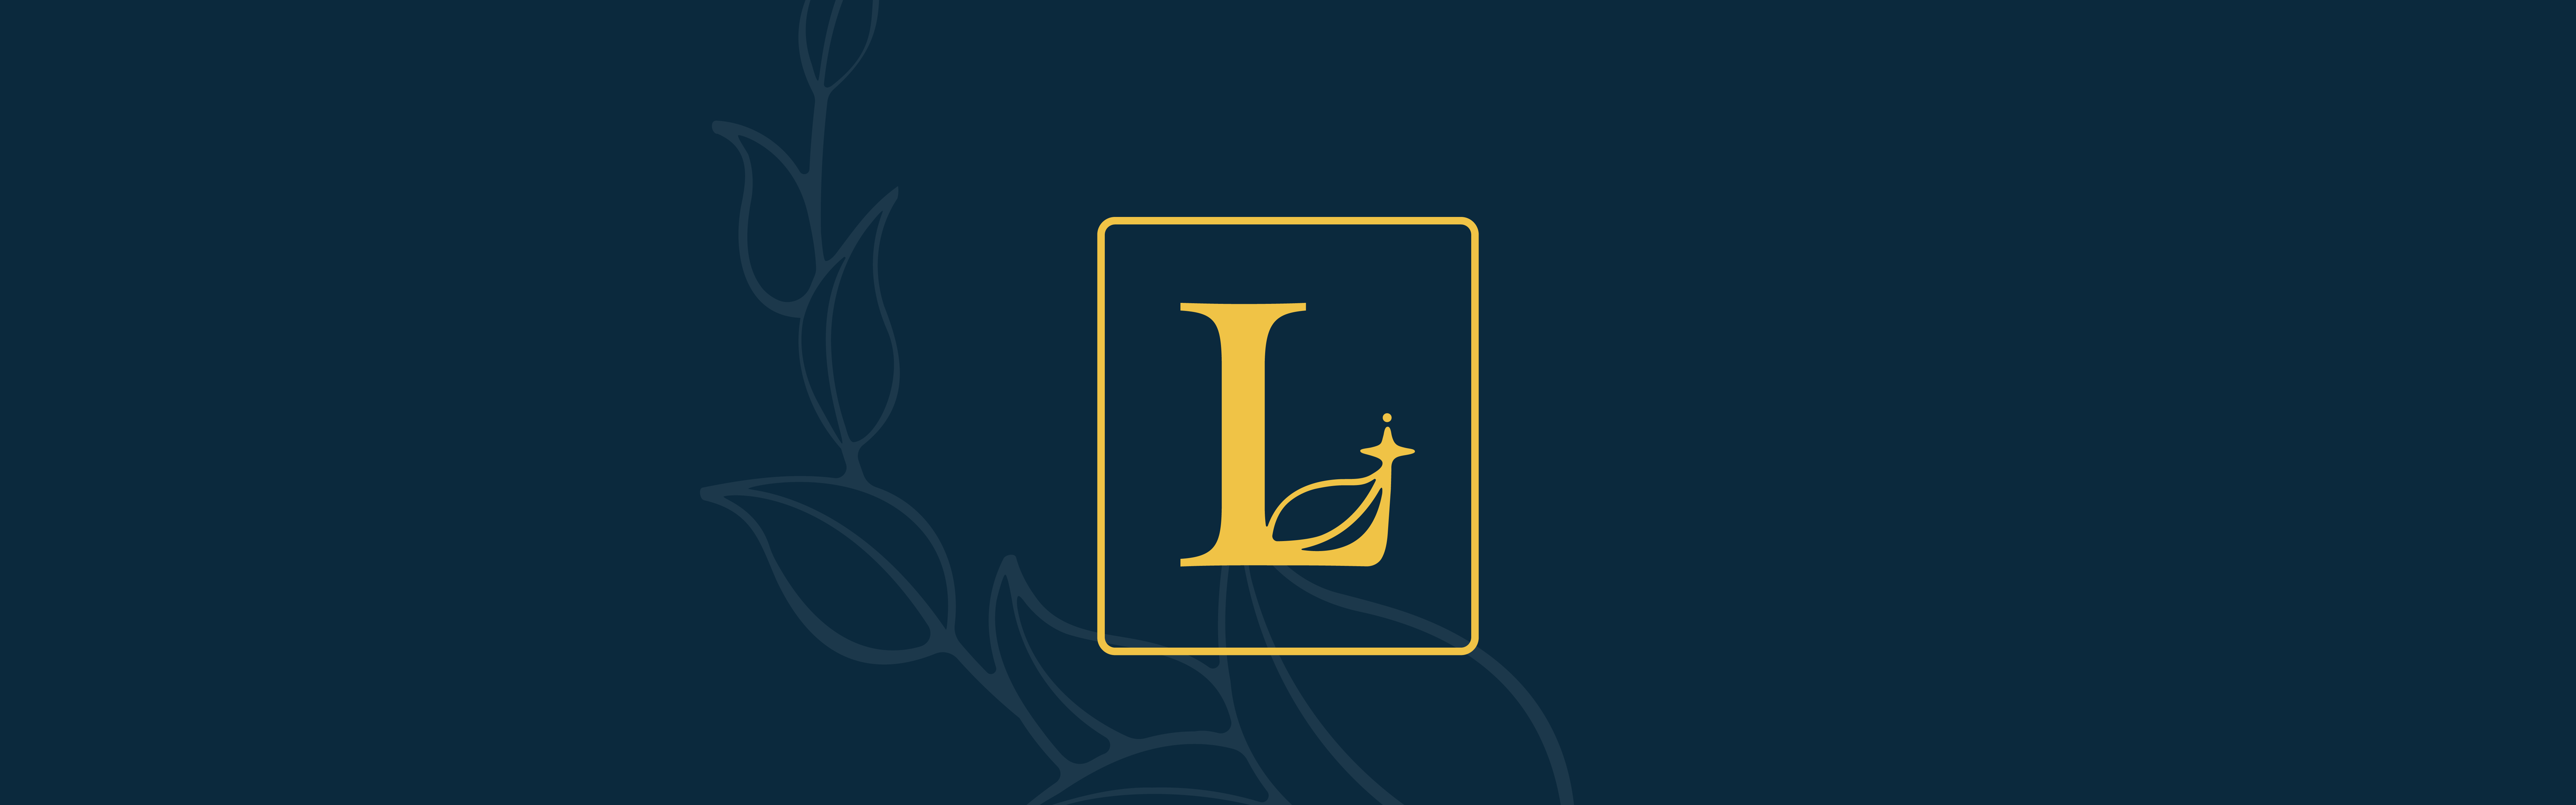 Blue background with a stylized golden letter "L" in the center of a vertical rectangle, surrounded by faint plant-like illustrations for Lucero Wellbeing.